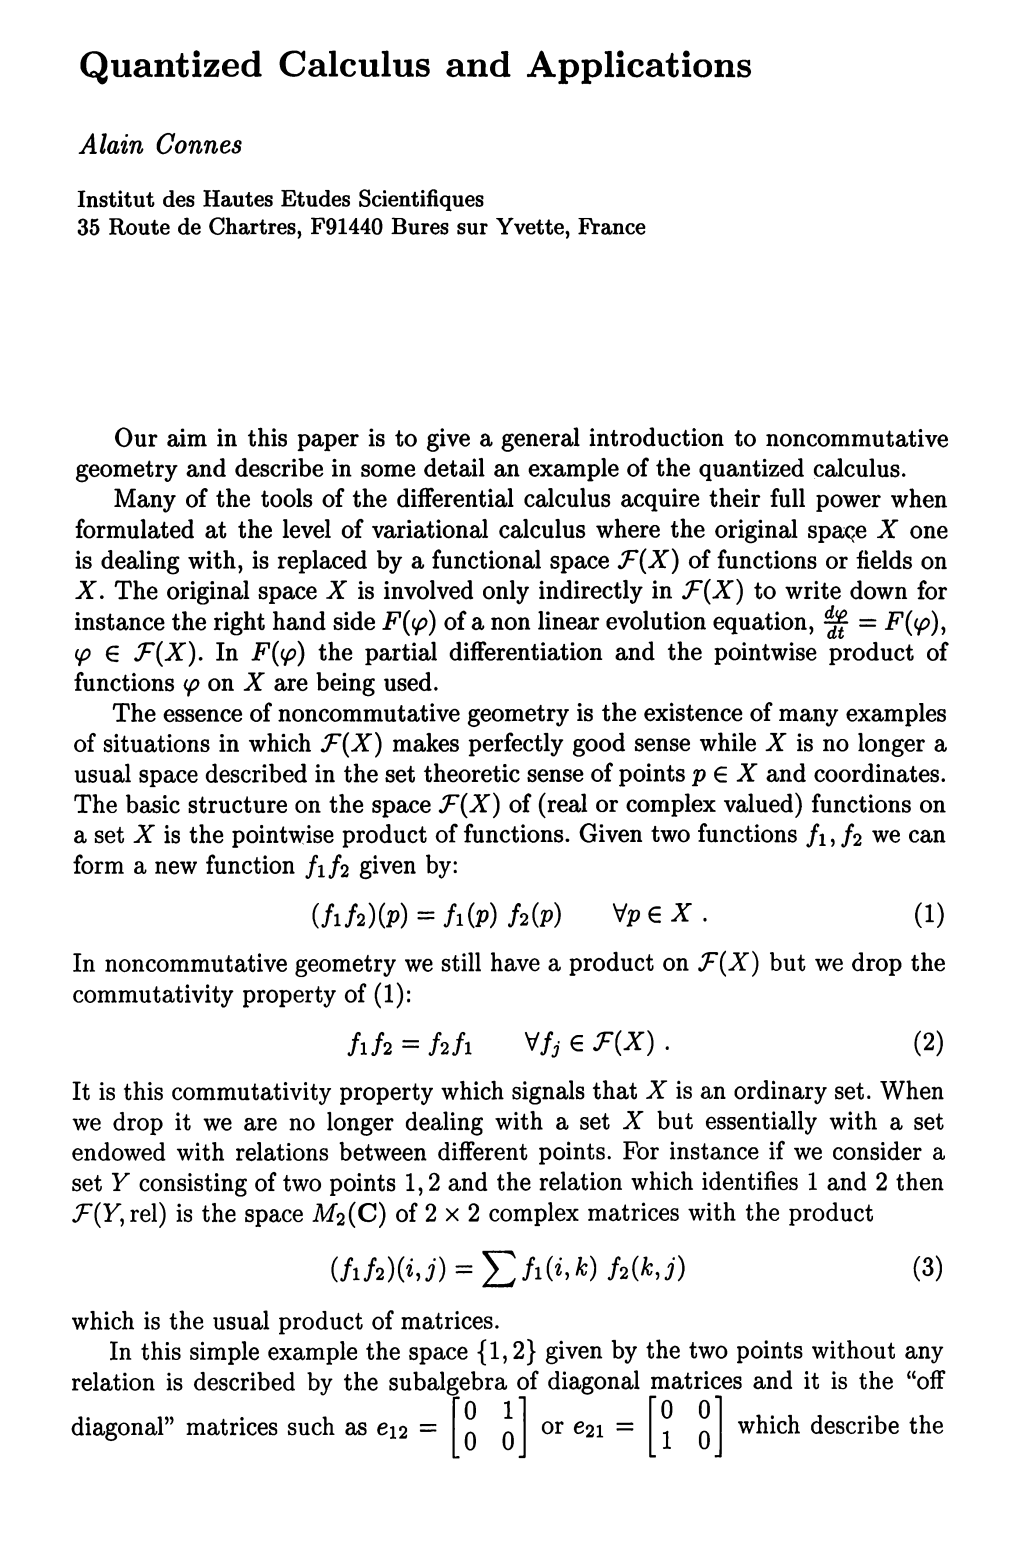 Quantized Calculus and Applications